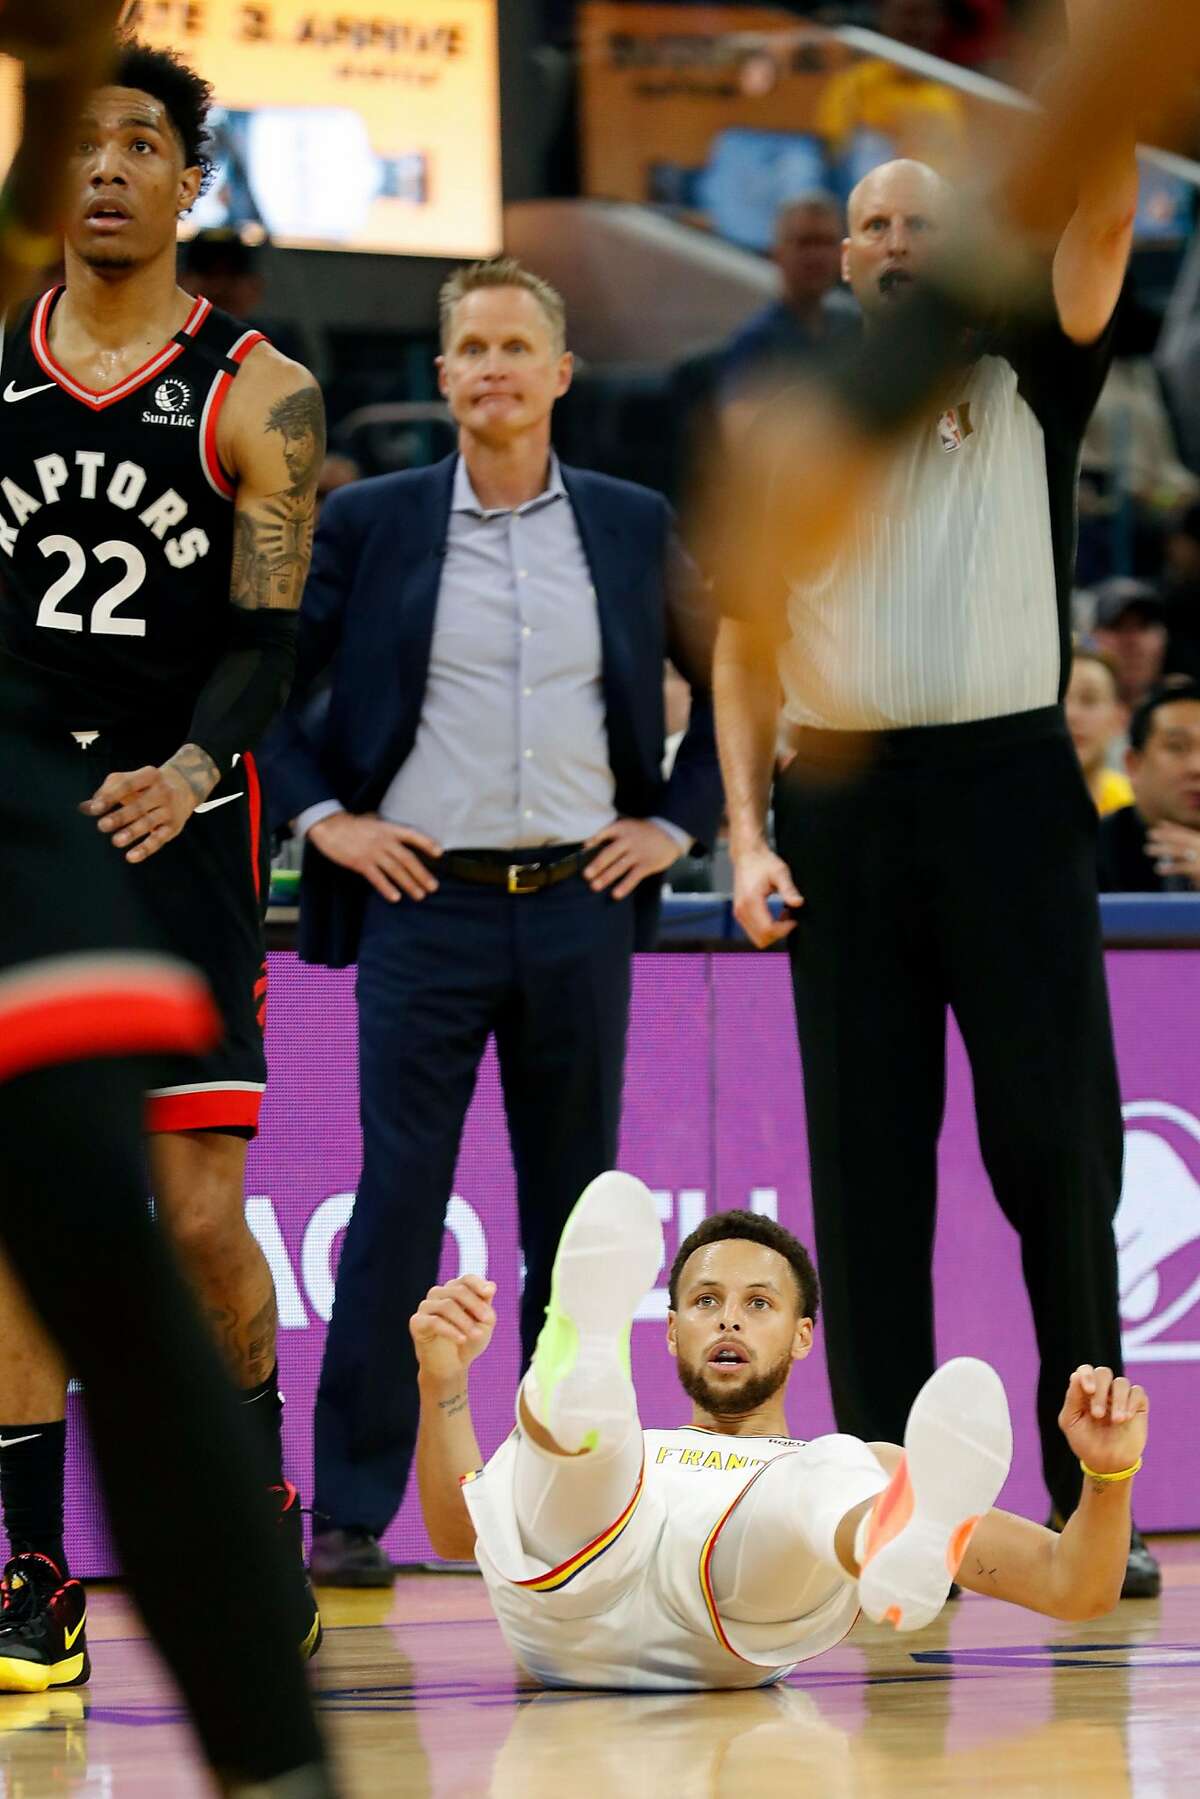 Video emerges of Raptors fans heckling, swearing at Stephen Curry's parents